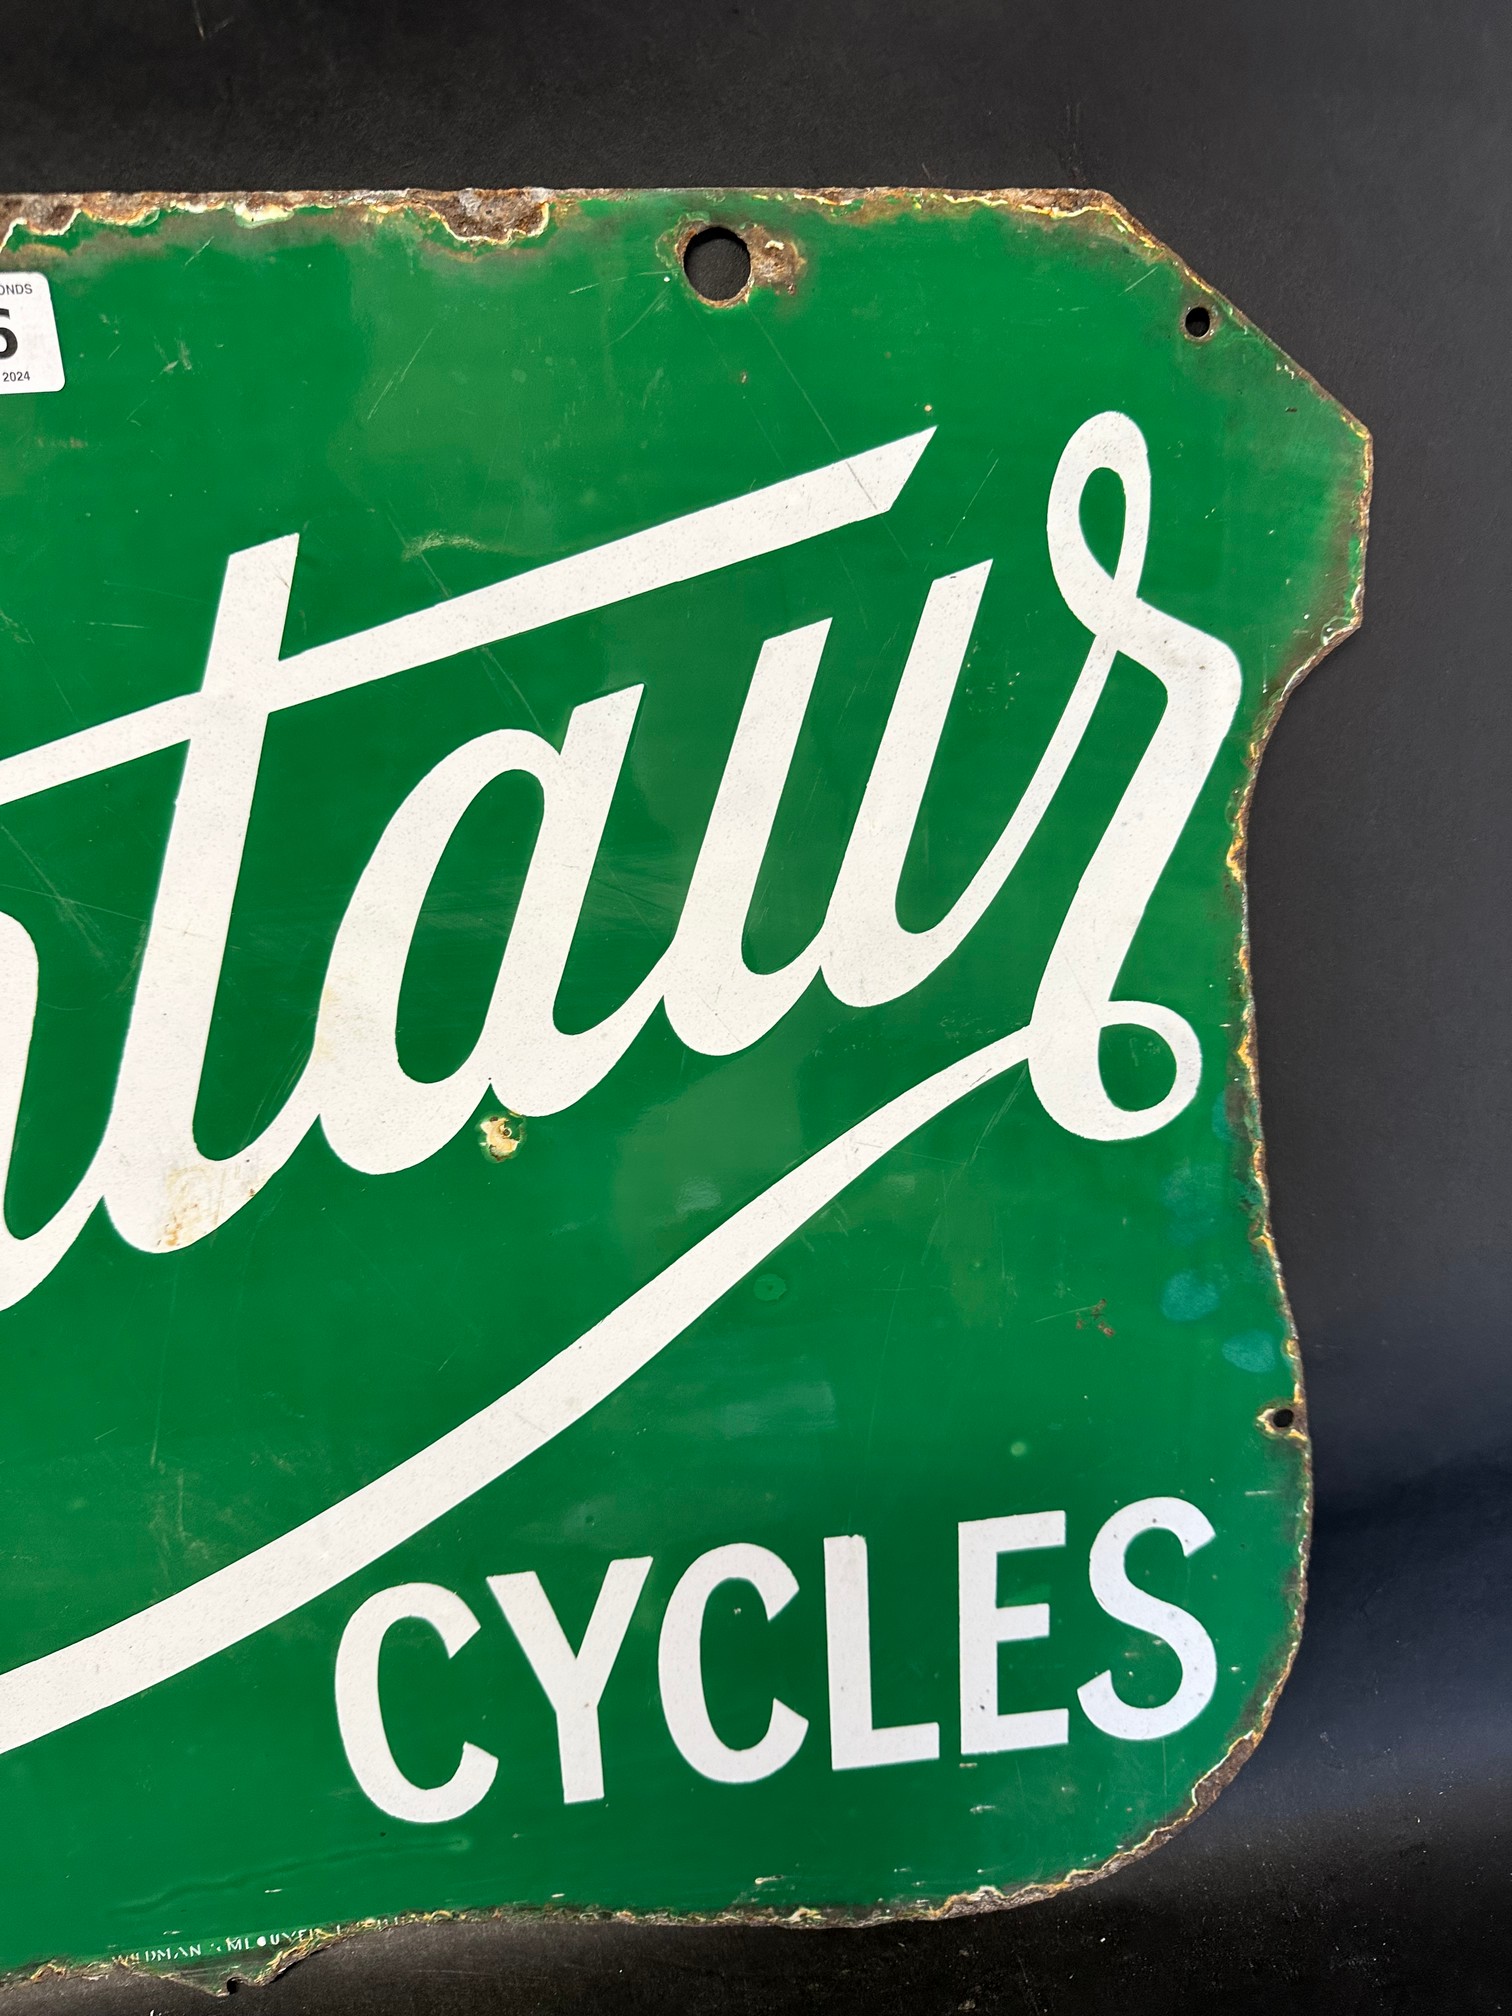 A Centaur Cycles hanging enamel advertising sign by Wildman & Meguyer, 24 x 17 3/4". - Image 5 of 6